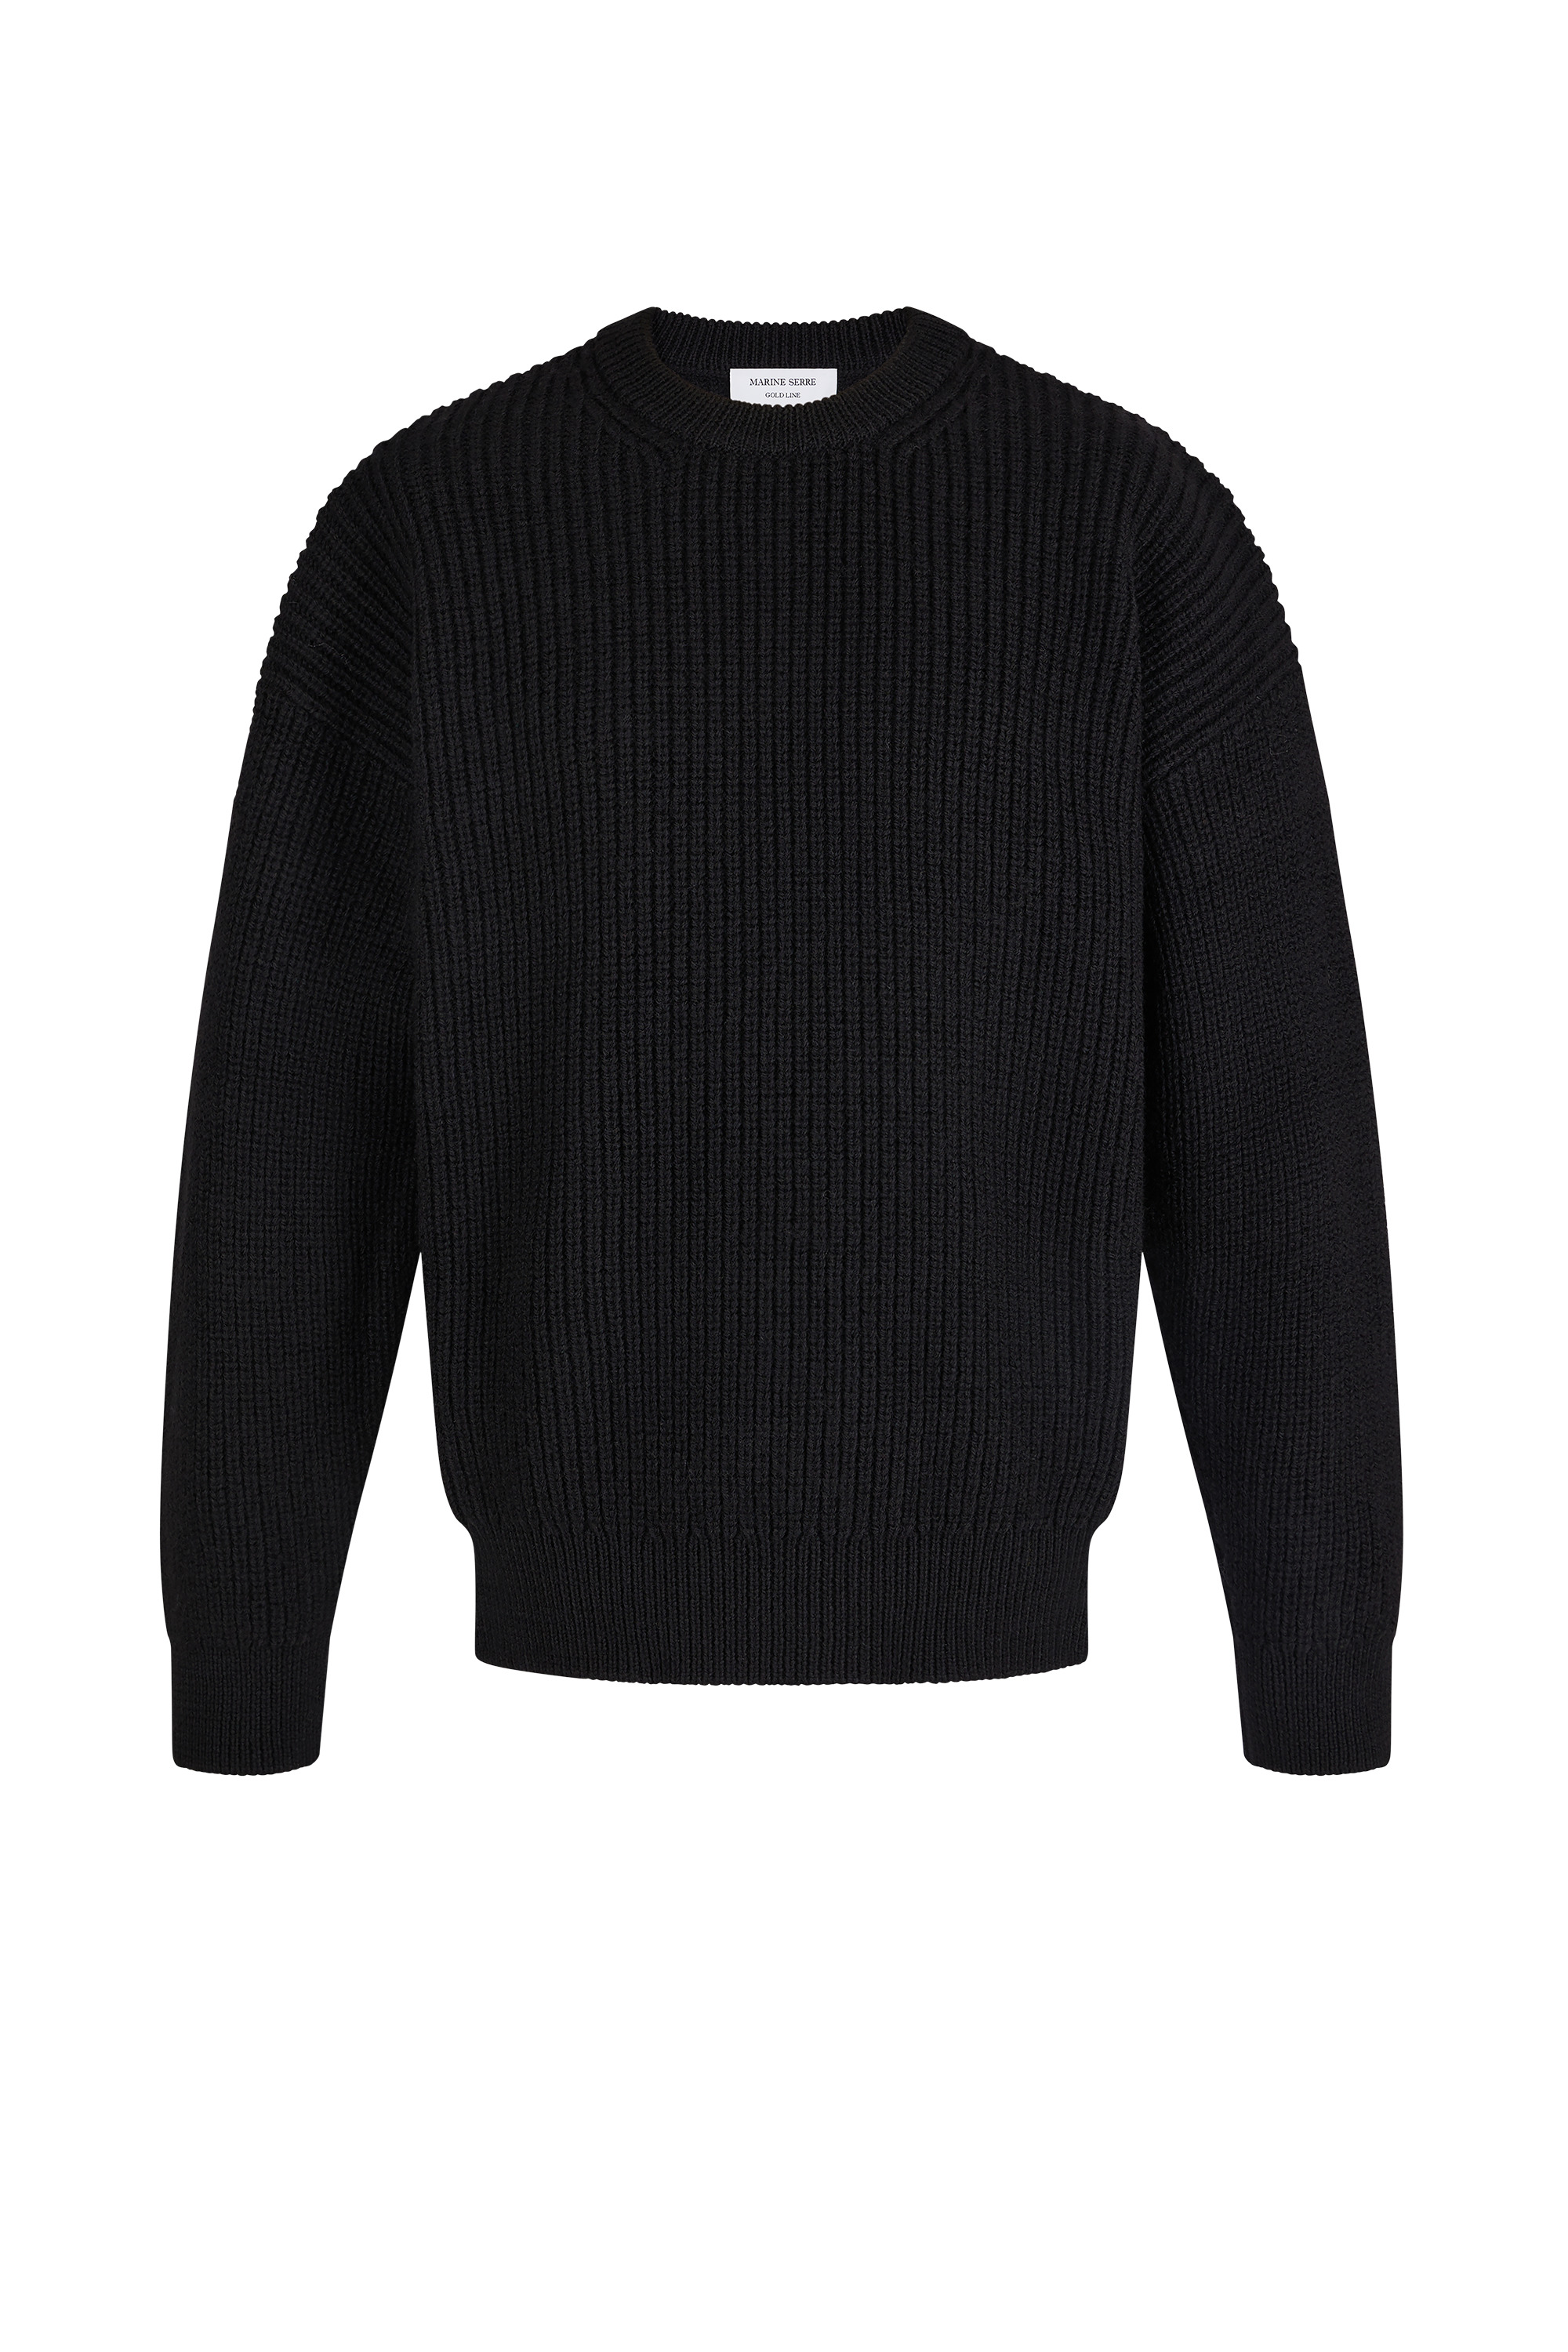 Wool And Fluffy Knit Crewneck Pullover - 1